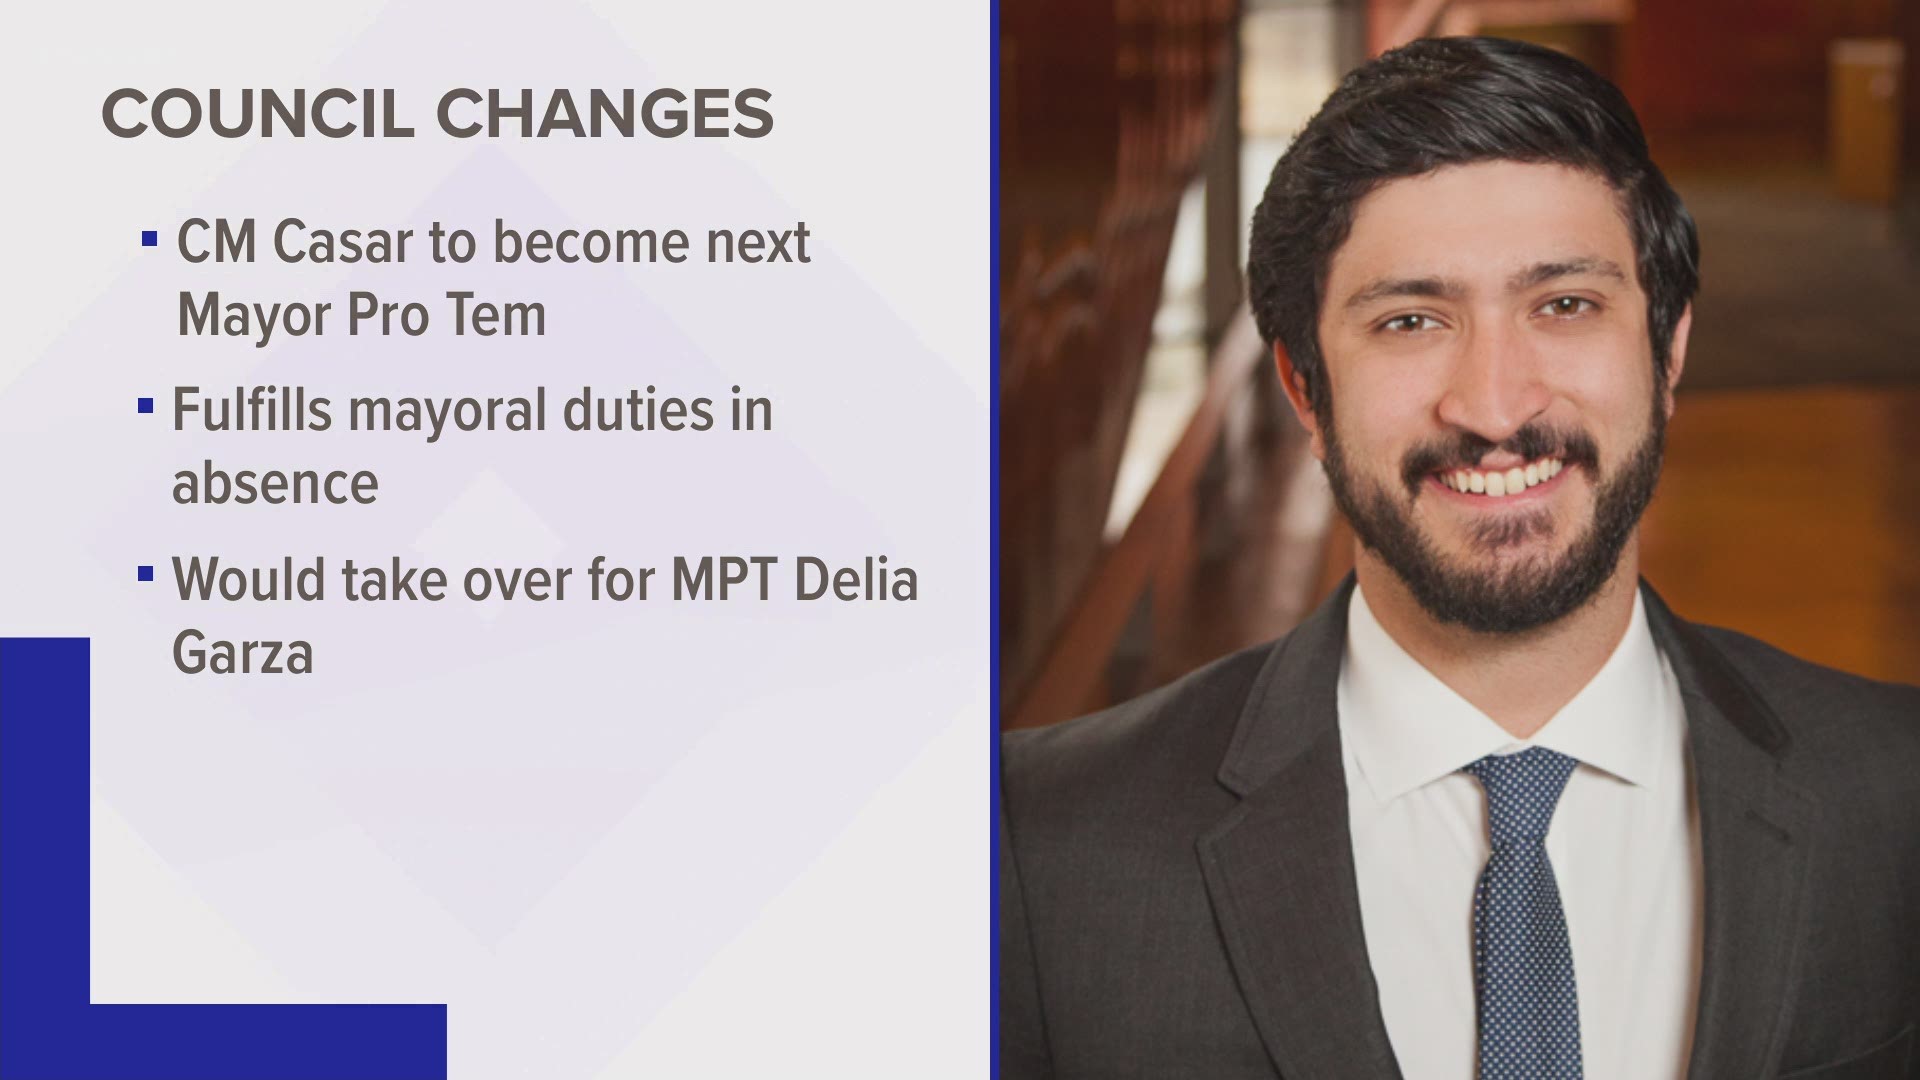 District 4 Councilmember Greg Casar's office said he has the votes to take over as mayor pro tem now that Delia Garza will be Travis County Attorney.